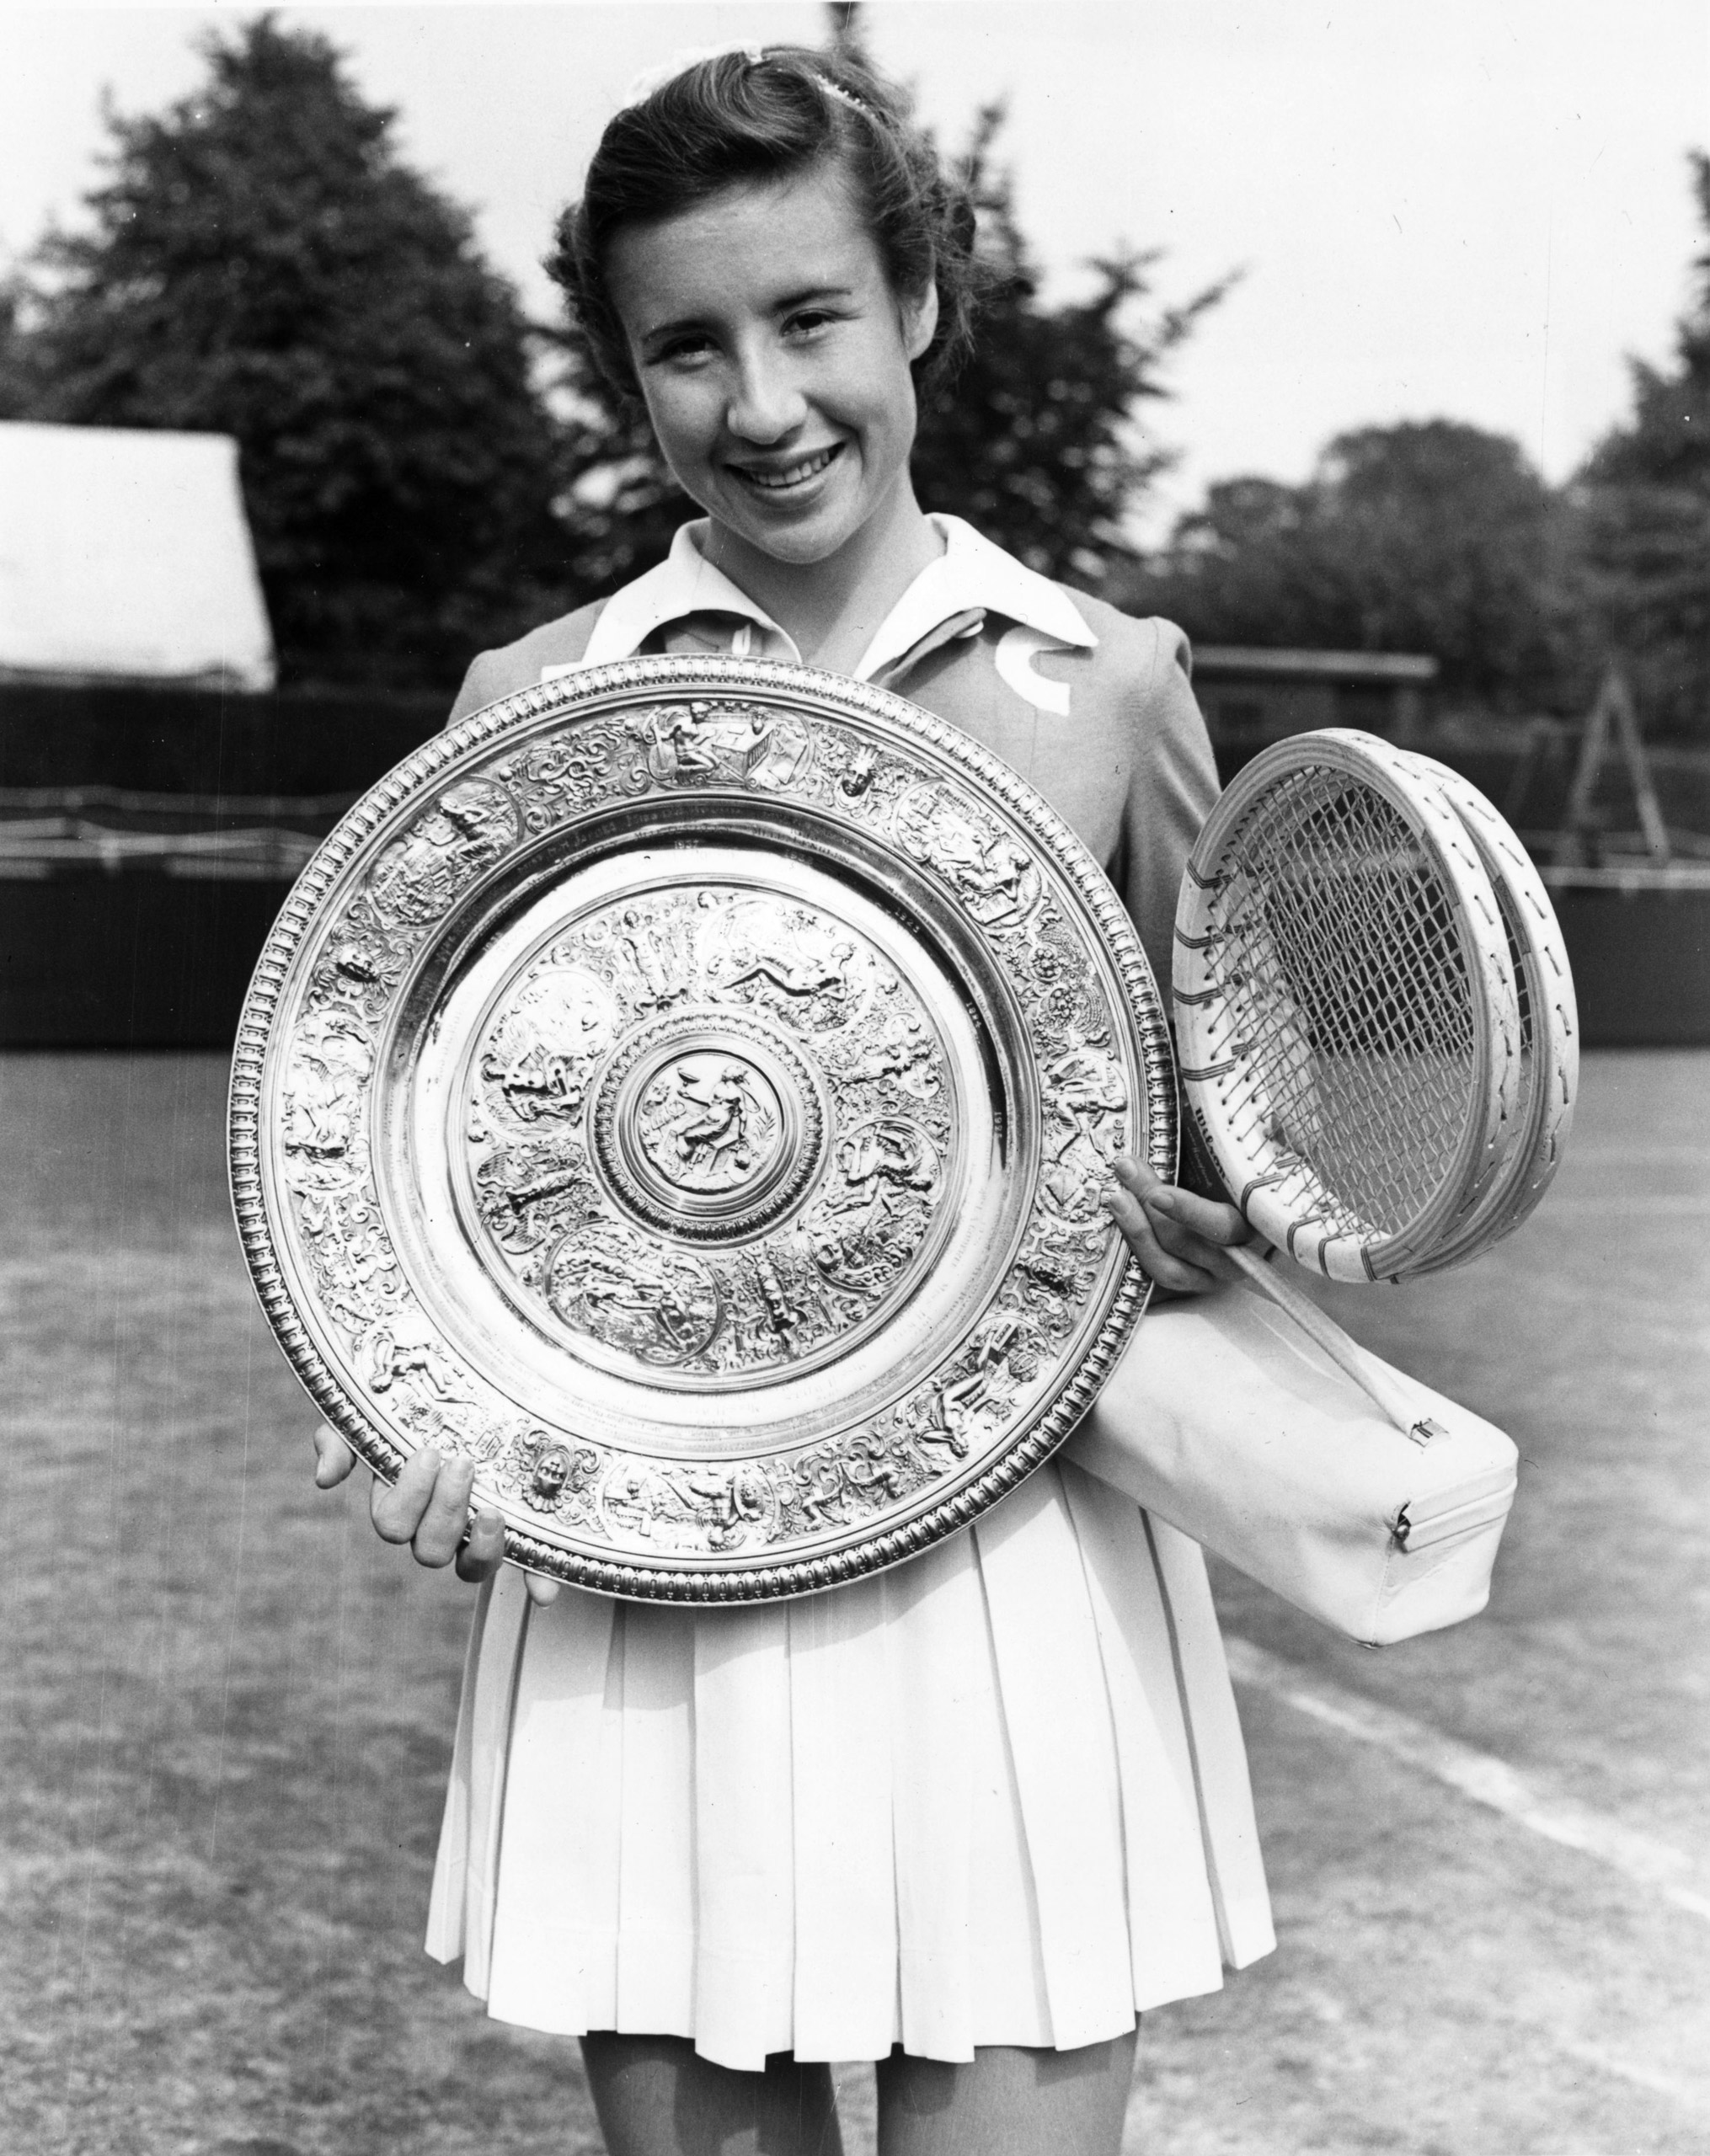 American tennis player Maureen Connolly (Little Mo) with the women's singles trophy after beating Doris Hart in the final at the Wimbledon Lawn Tennis Championships, July 1953.